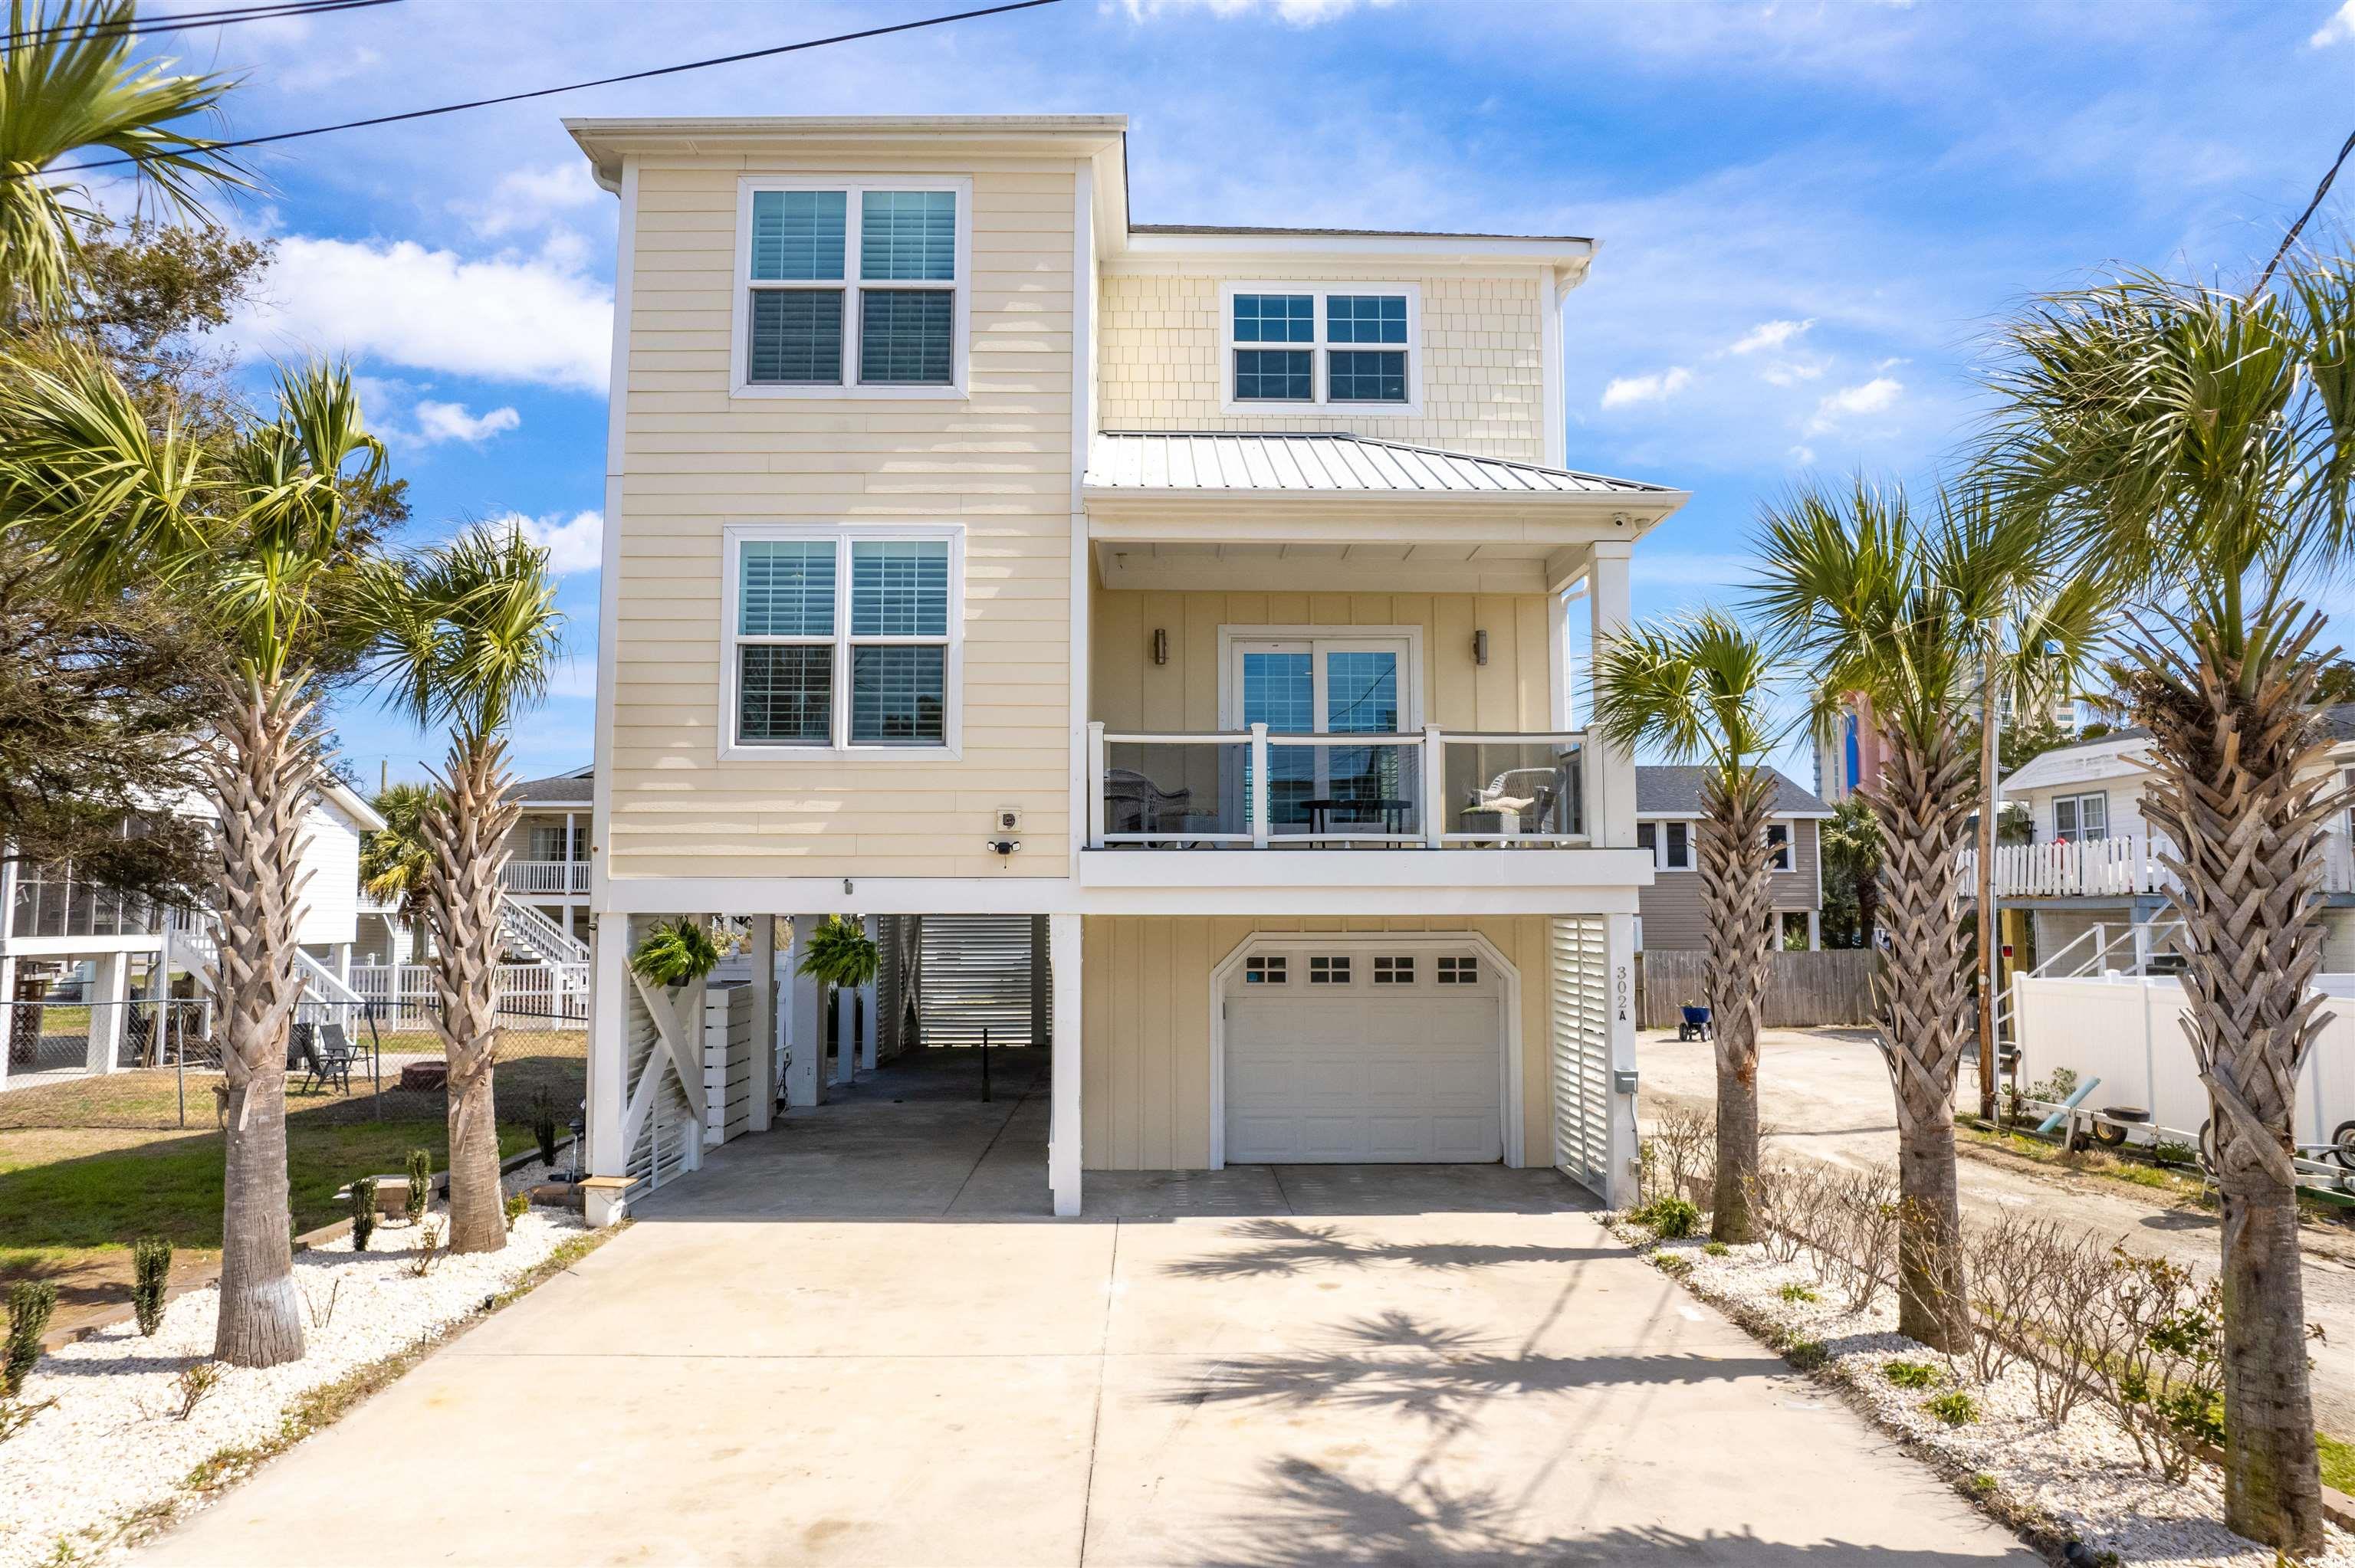 **you need to see the live video of cherry grove and this home! ask you agent for the link!** located in cherry grove in north myrtle beach! this home is located just little over a block from the famous cherry grove beach pier and the beach! this wonderful home is also located close to the cherry grove boat ramp for you to get out of the water at cherry grove and take hog inlet out to the ocean! the home itself is 4 bedrooms, 4 baths, with a garage, and parking with storage underneath! enjoy the extremely high ceilings throughout the main living space of the home. out back is two decks and at the front of the home is a large balcony. watch the video to experience this home and cherry grove!